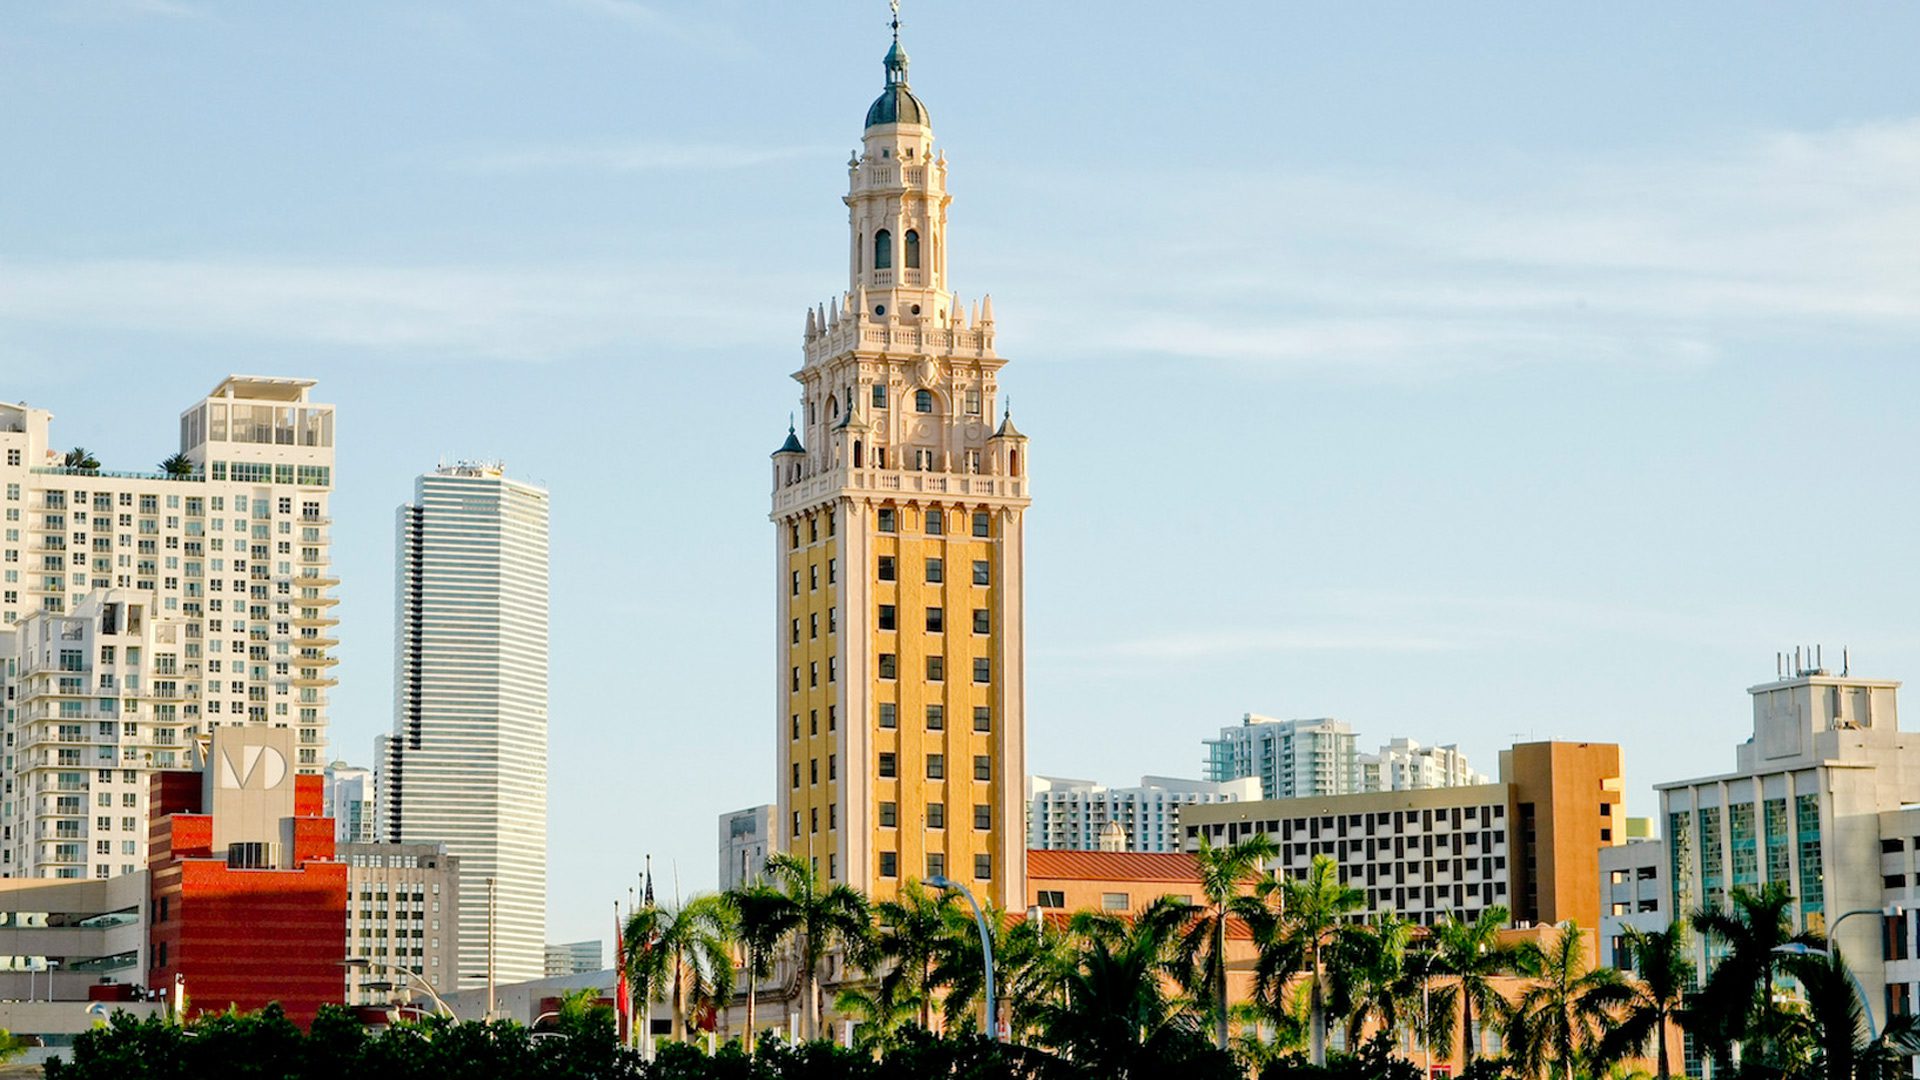 National Historic Landmark Freedom Tower in Downtown Miami